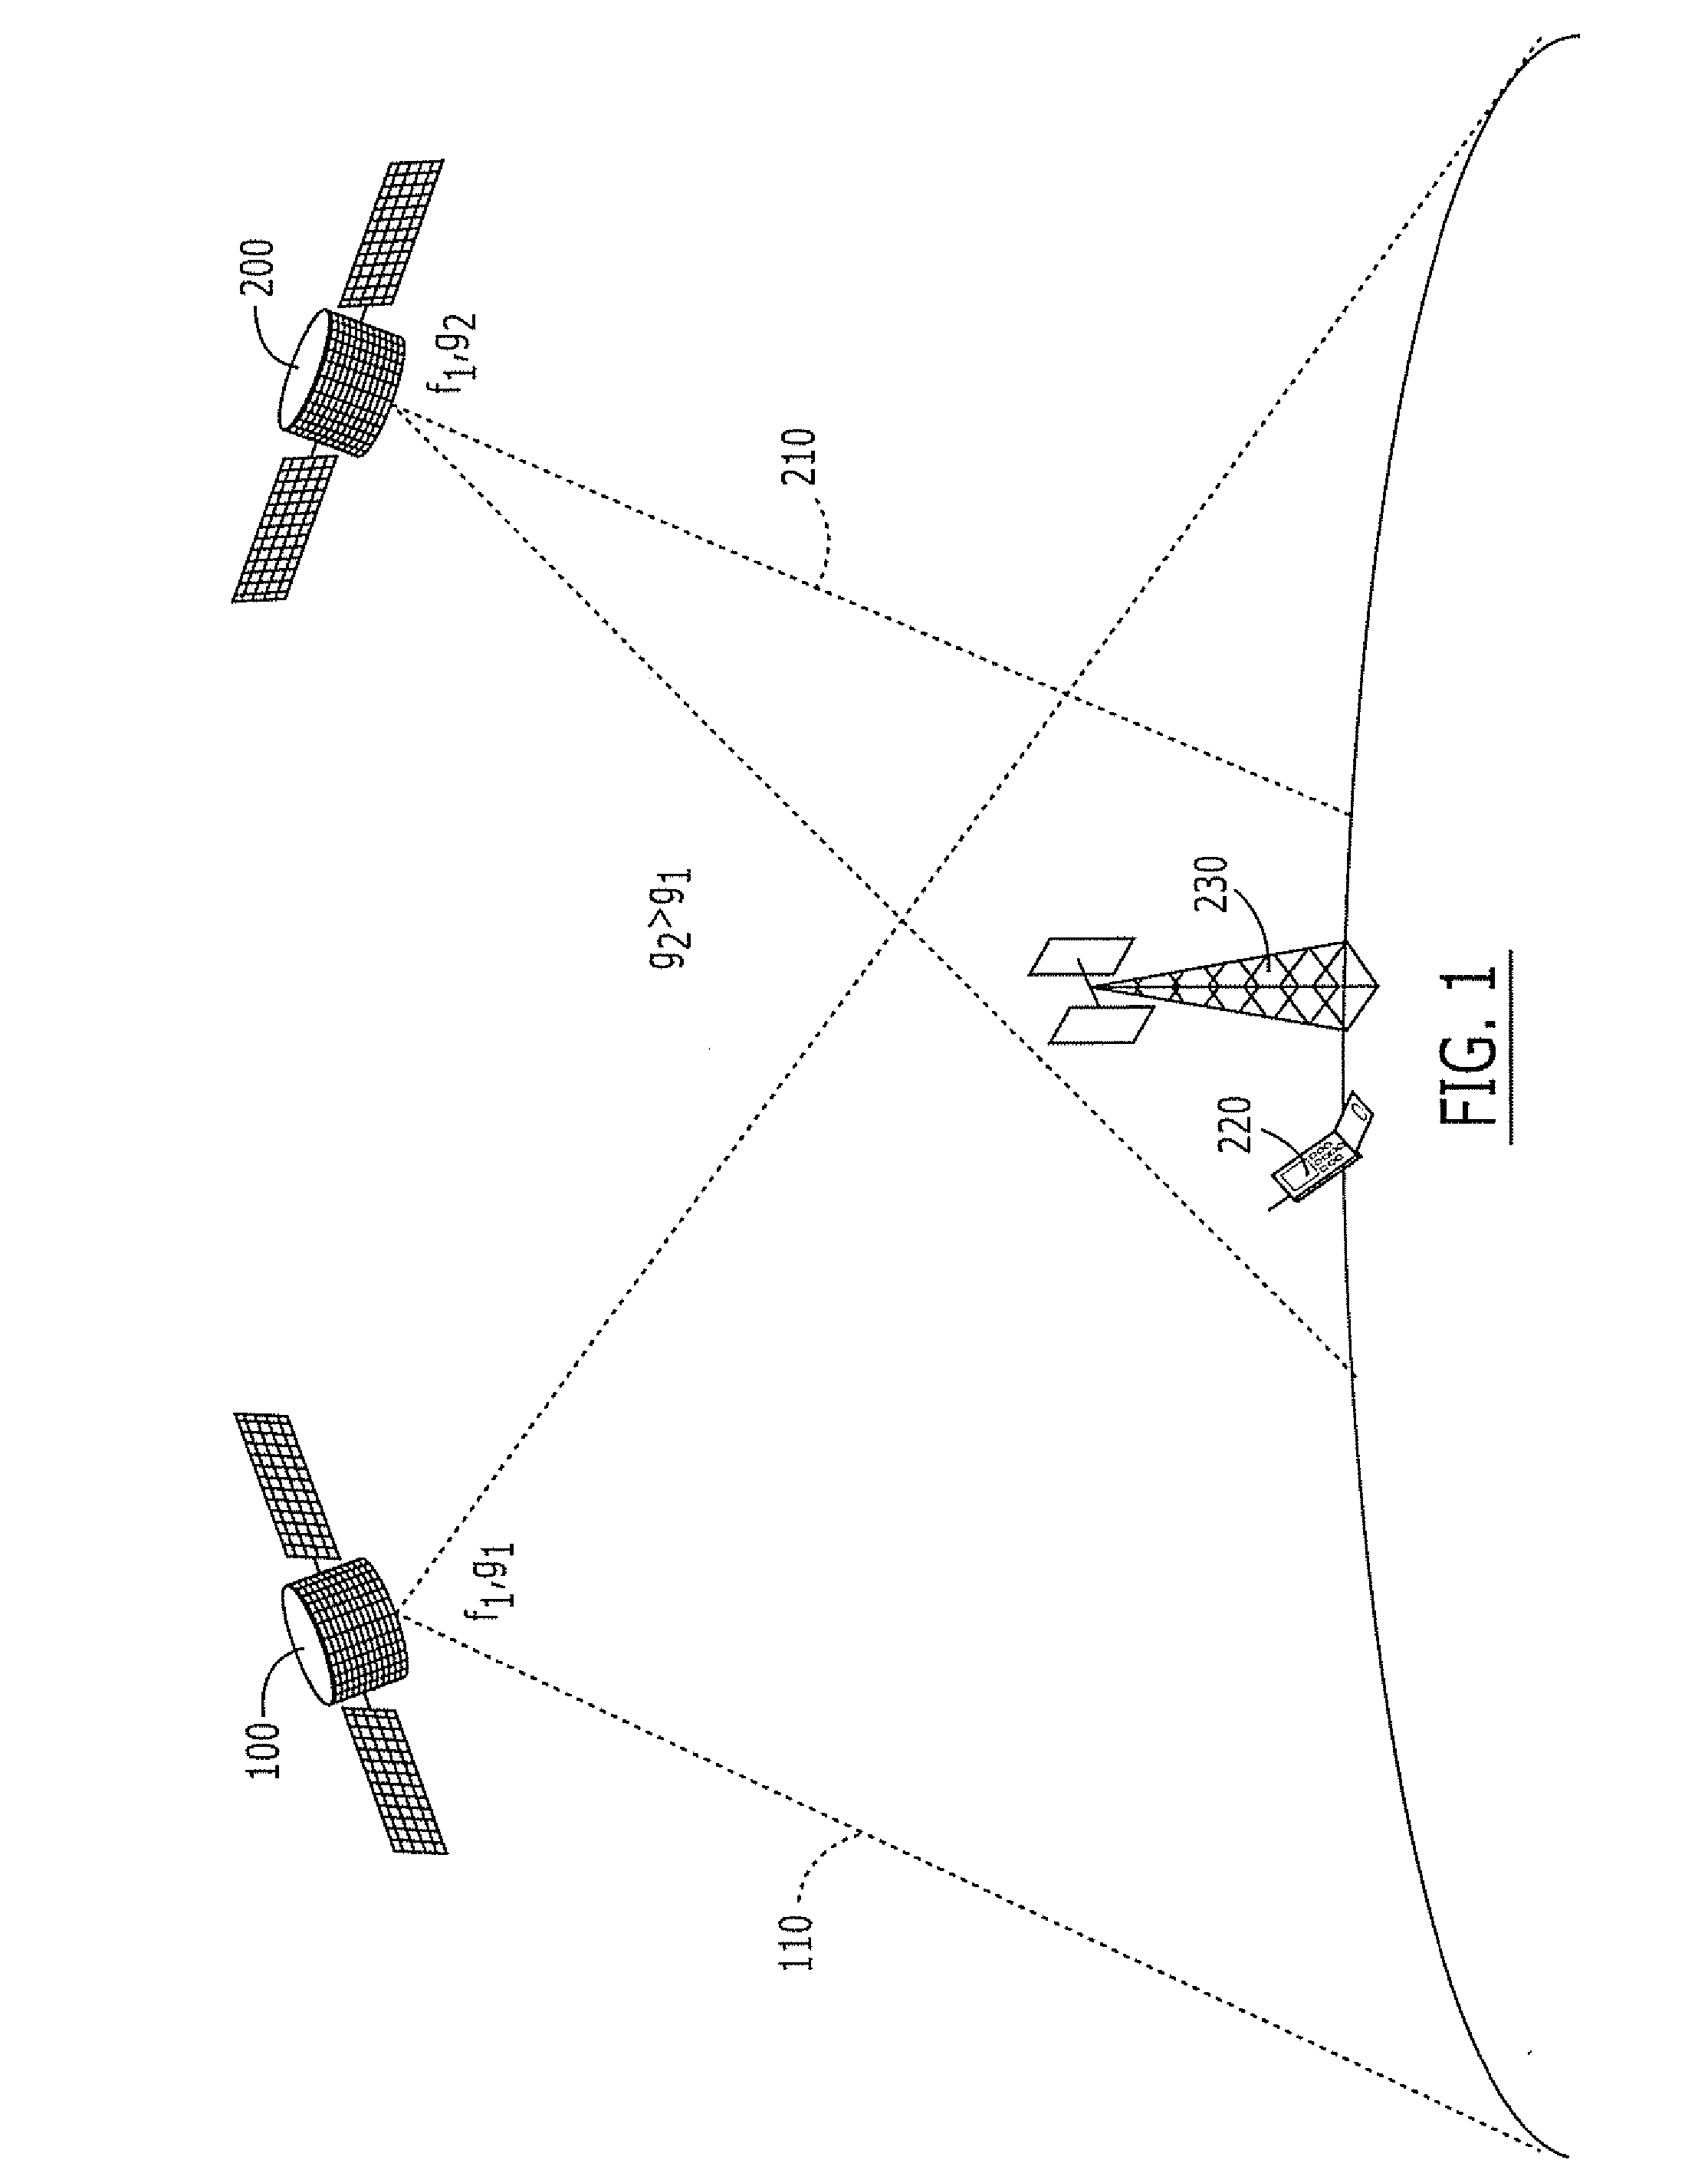 Systems and Methods for Inter-System Sharing of Satellite Communications Frequencies Within a Common Footprint